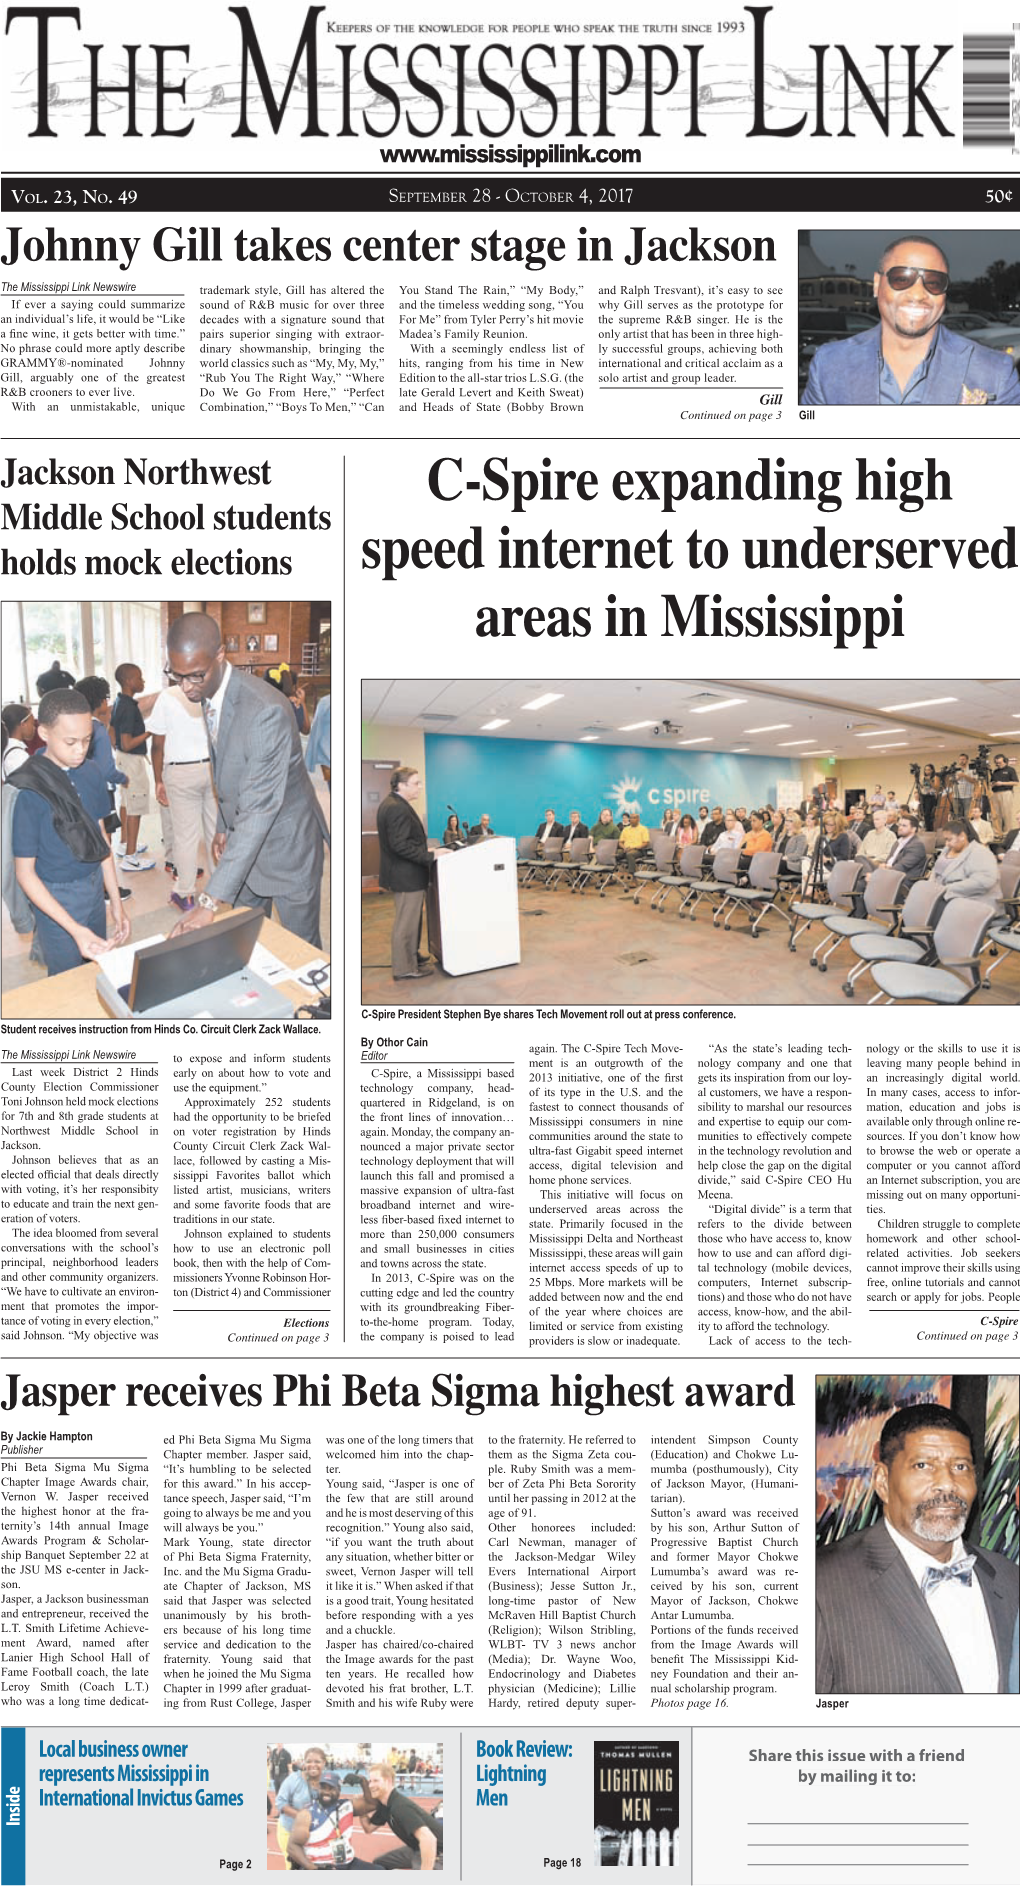 C-Spire Expanding High Middle School Students Holds Mock Elections Speed Internet to Underserved Areas in Mississippi